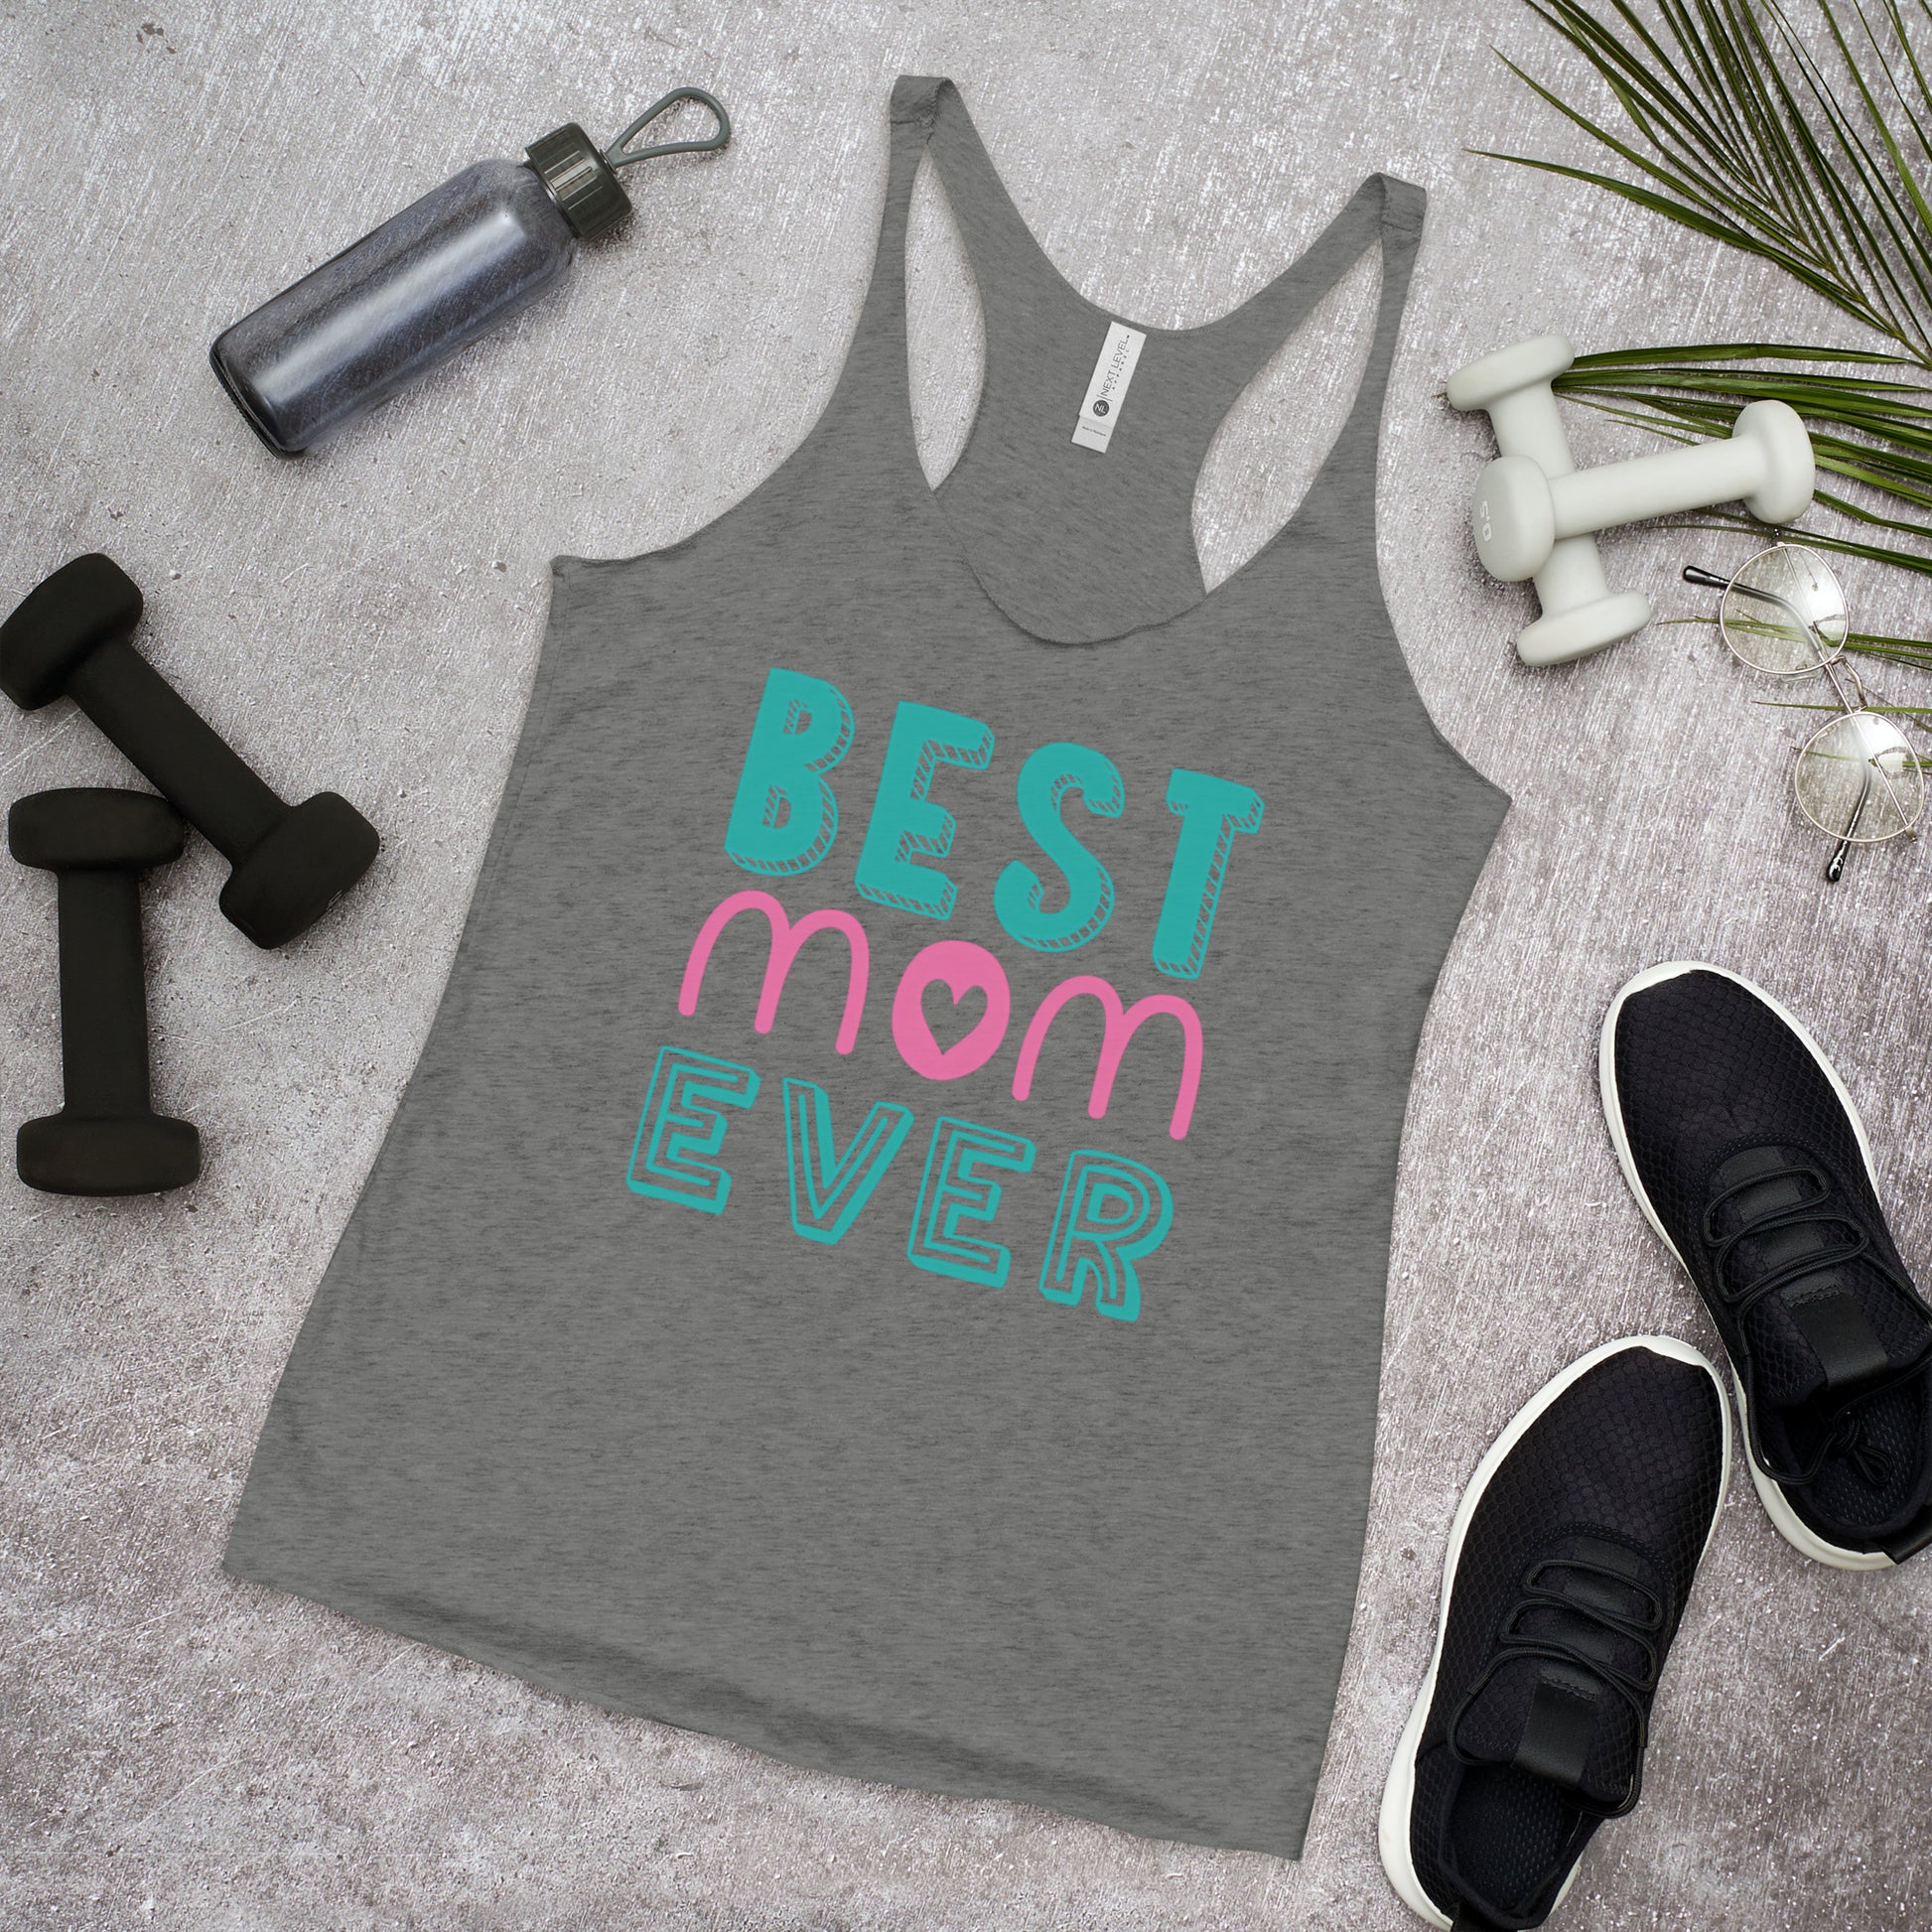 Grey tank top with text best MOM Ever